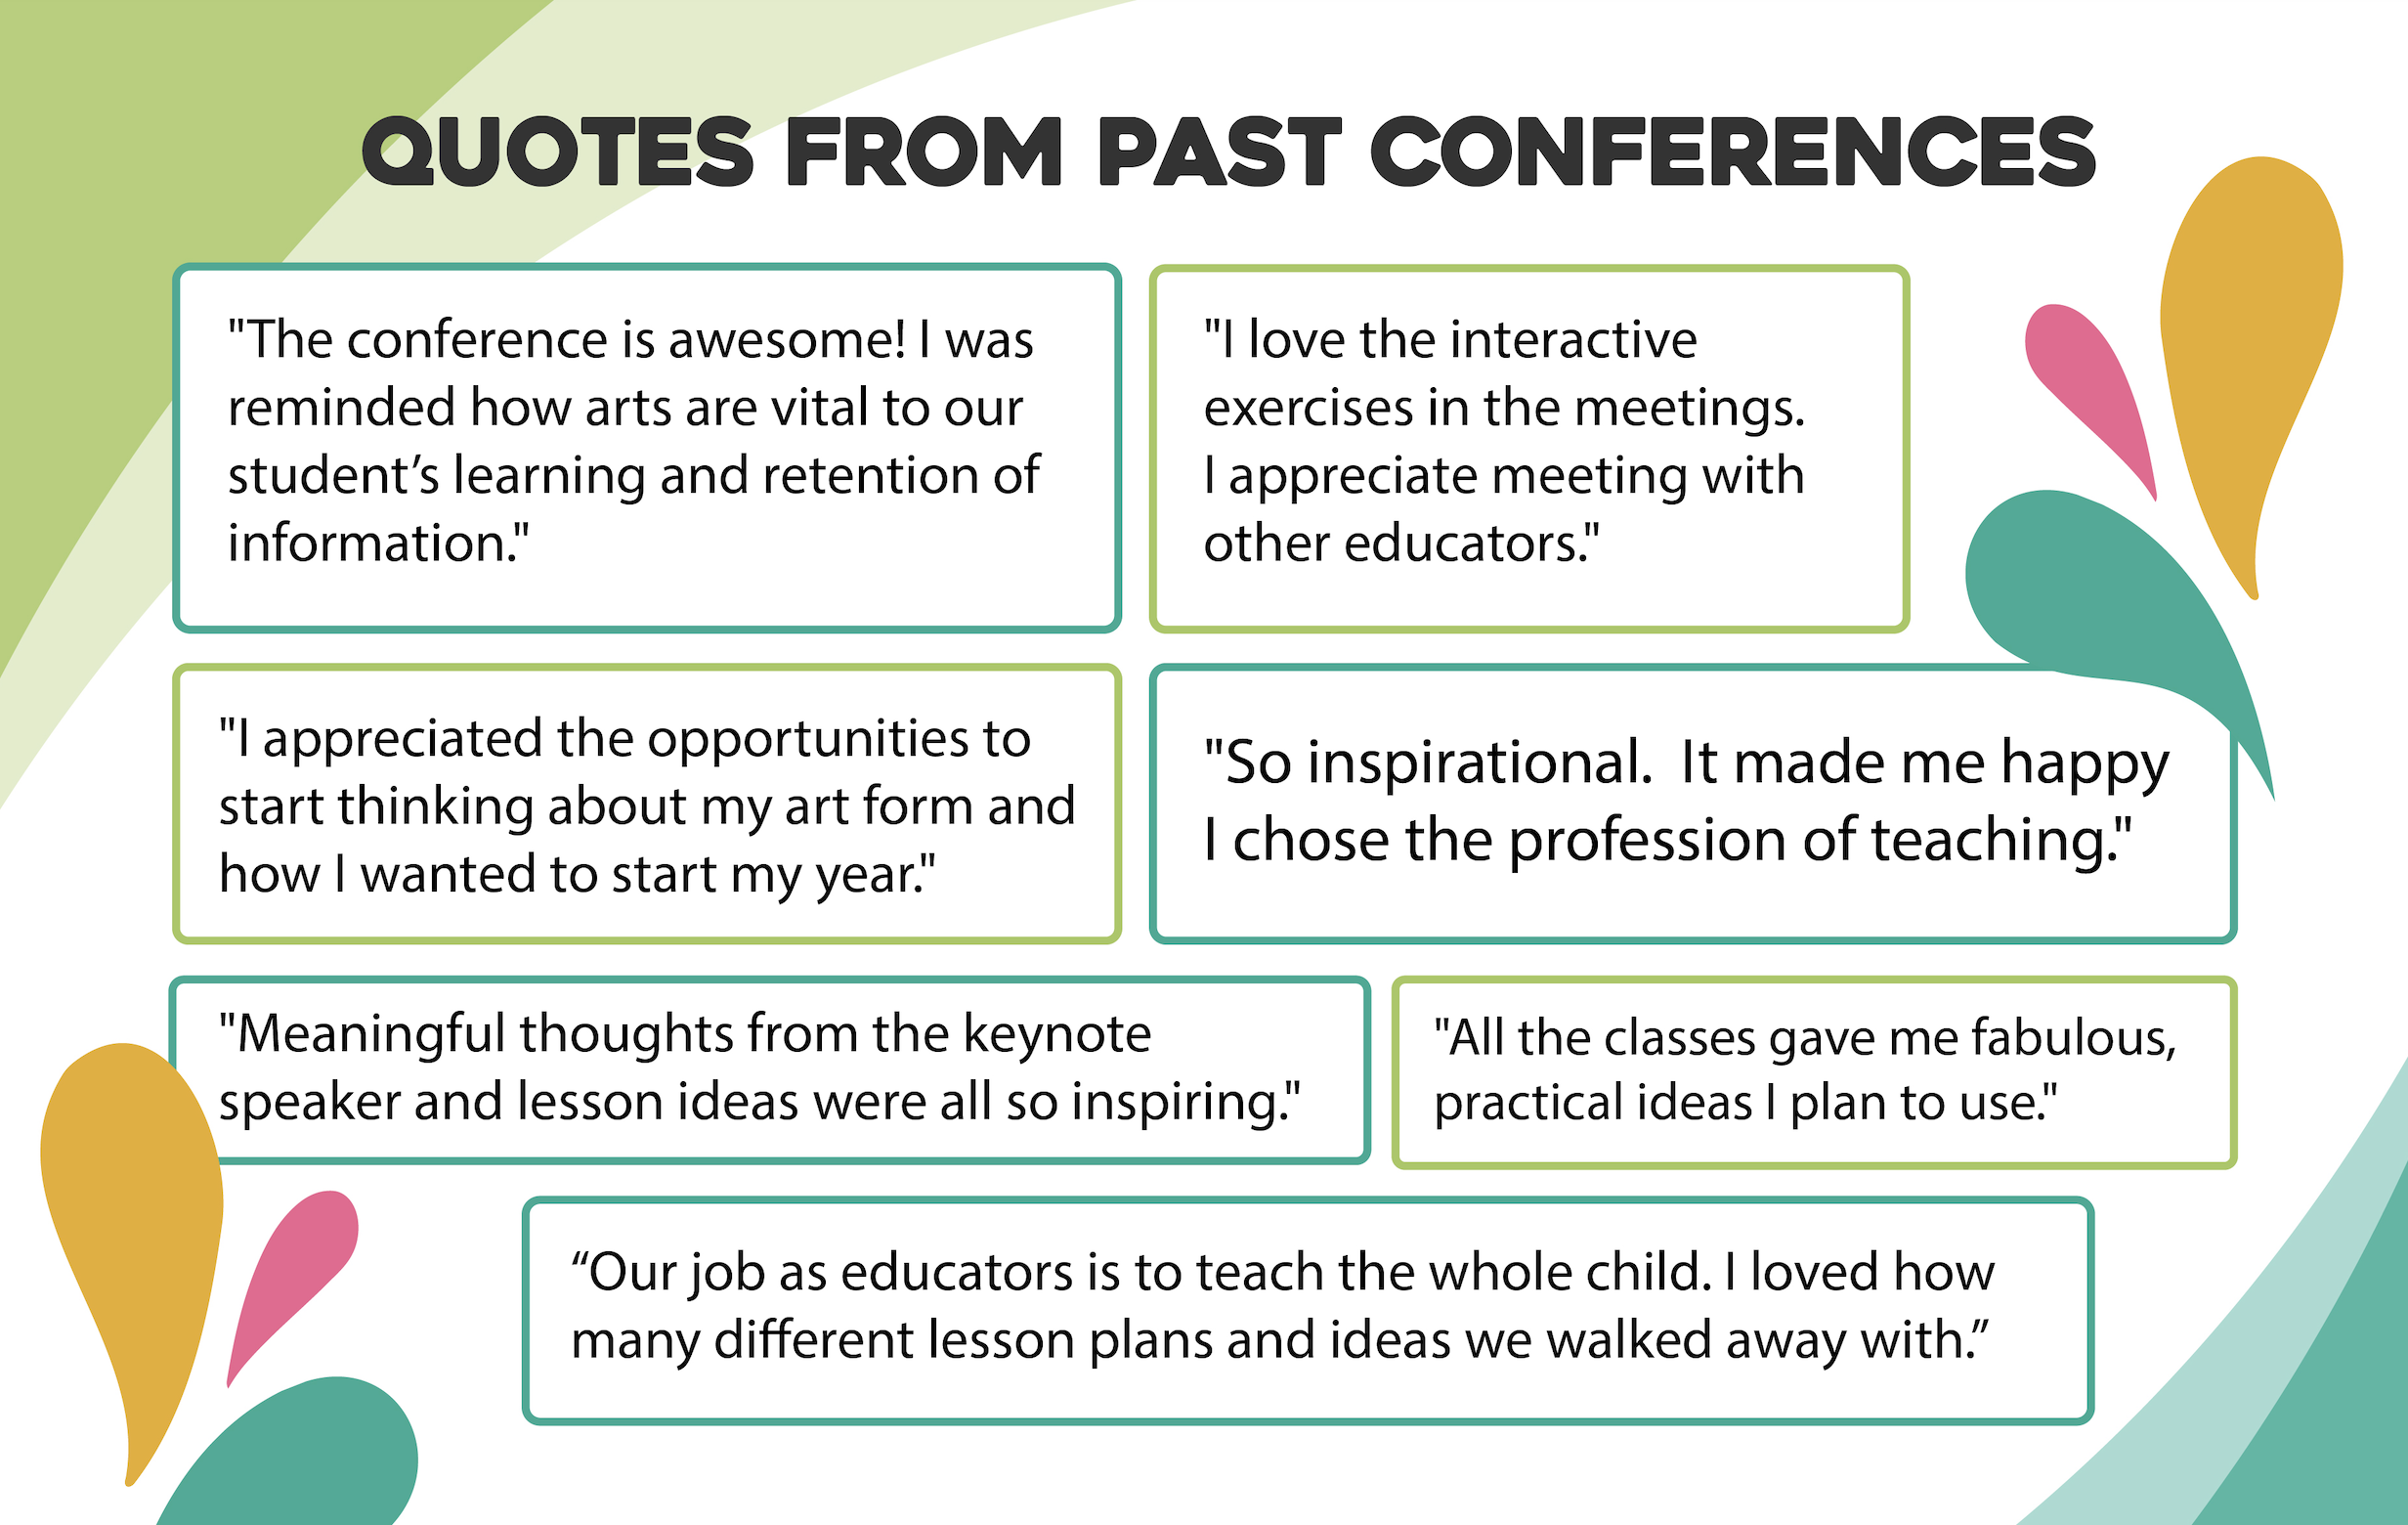 Quotes from past conferences